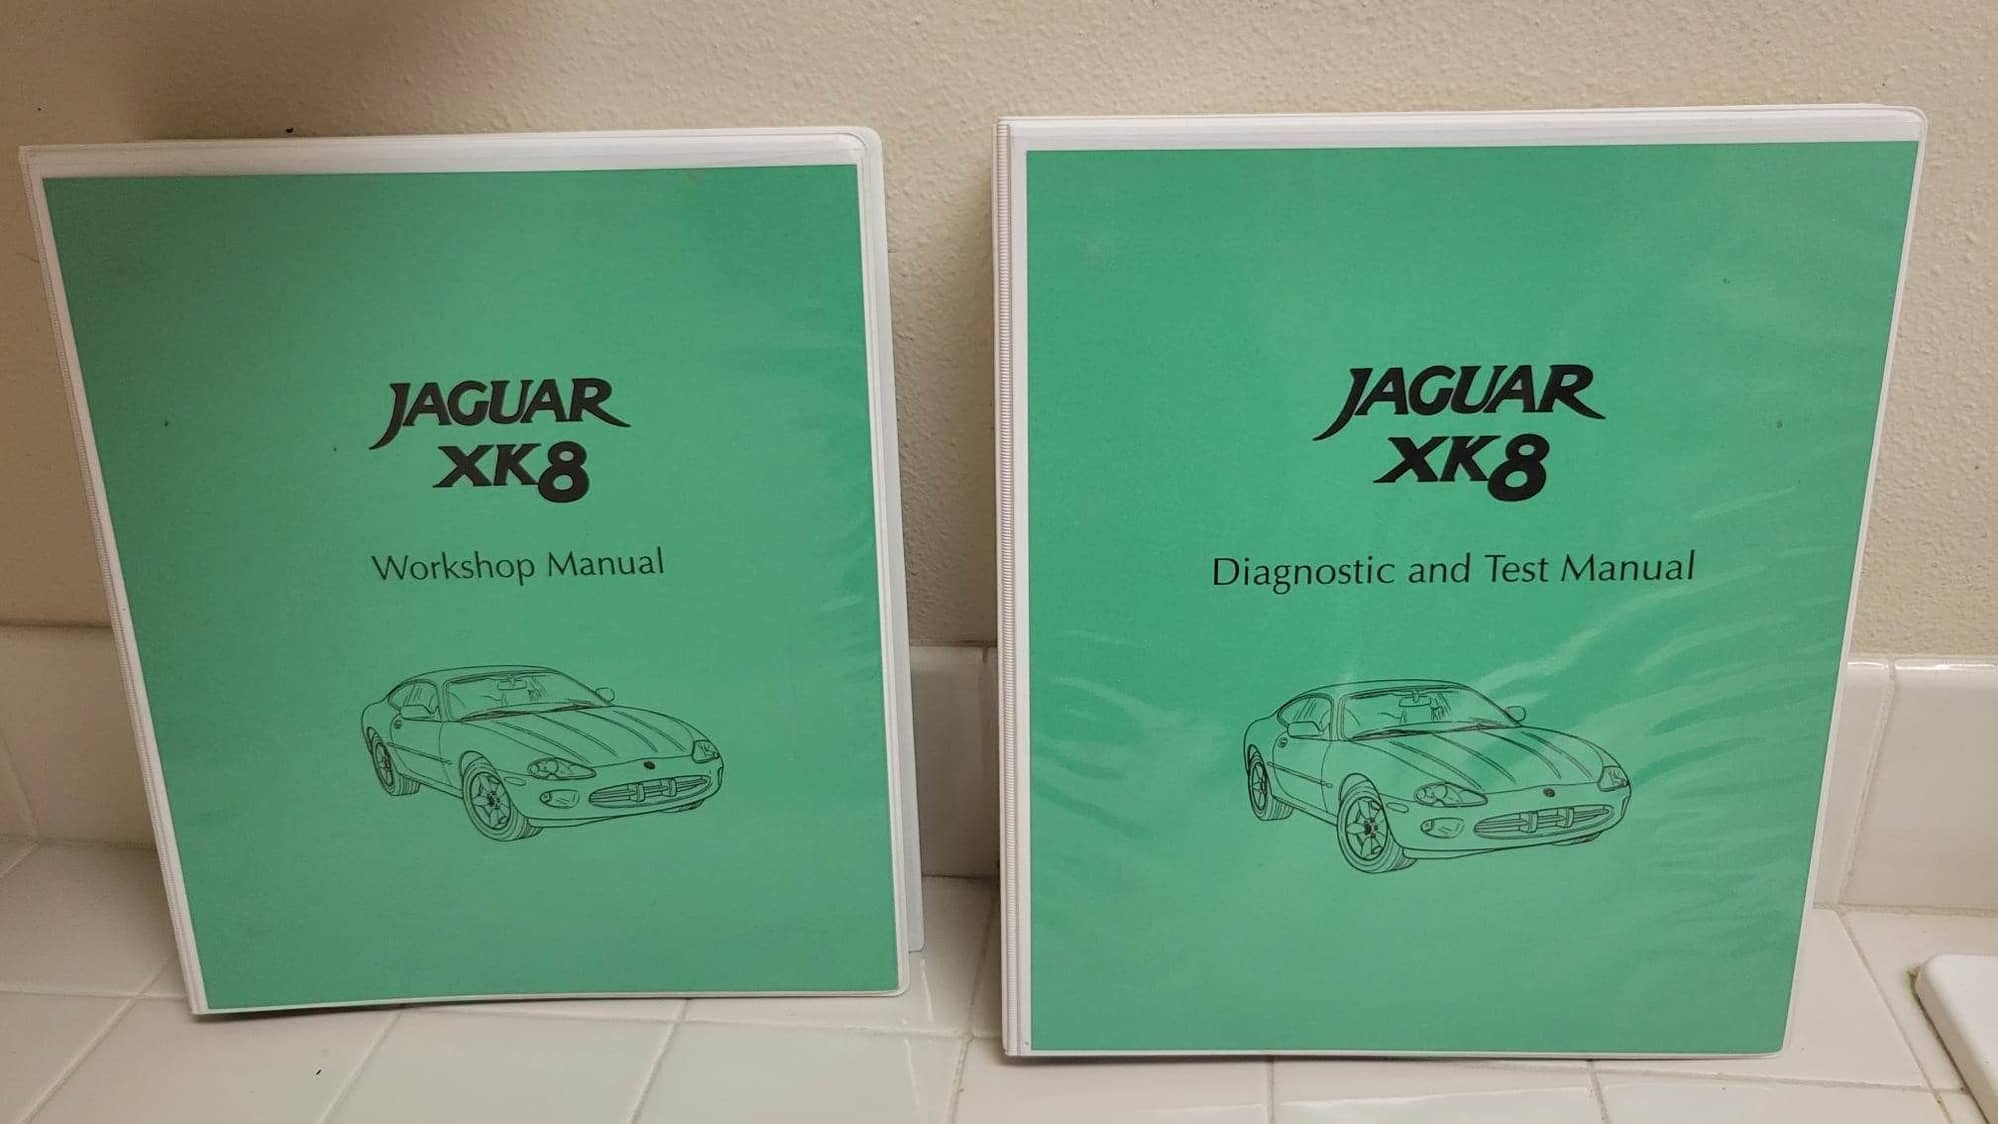 Miscellaneous - Jaguar XK8 (1) Diagnostic and Test Manual and (2)Workshop Manual - Used - 1996 to 2006 Jaguar XK8 - Bend, OR 97702, United States